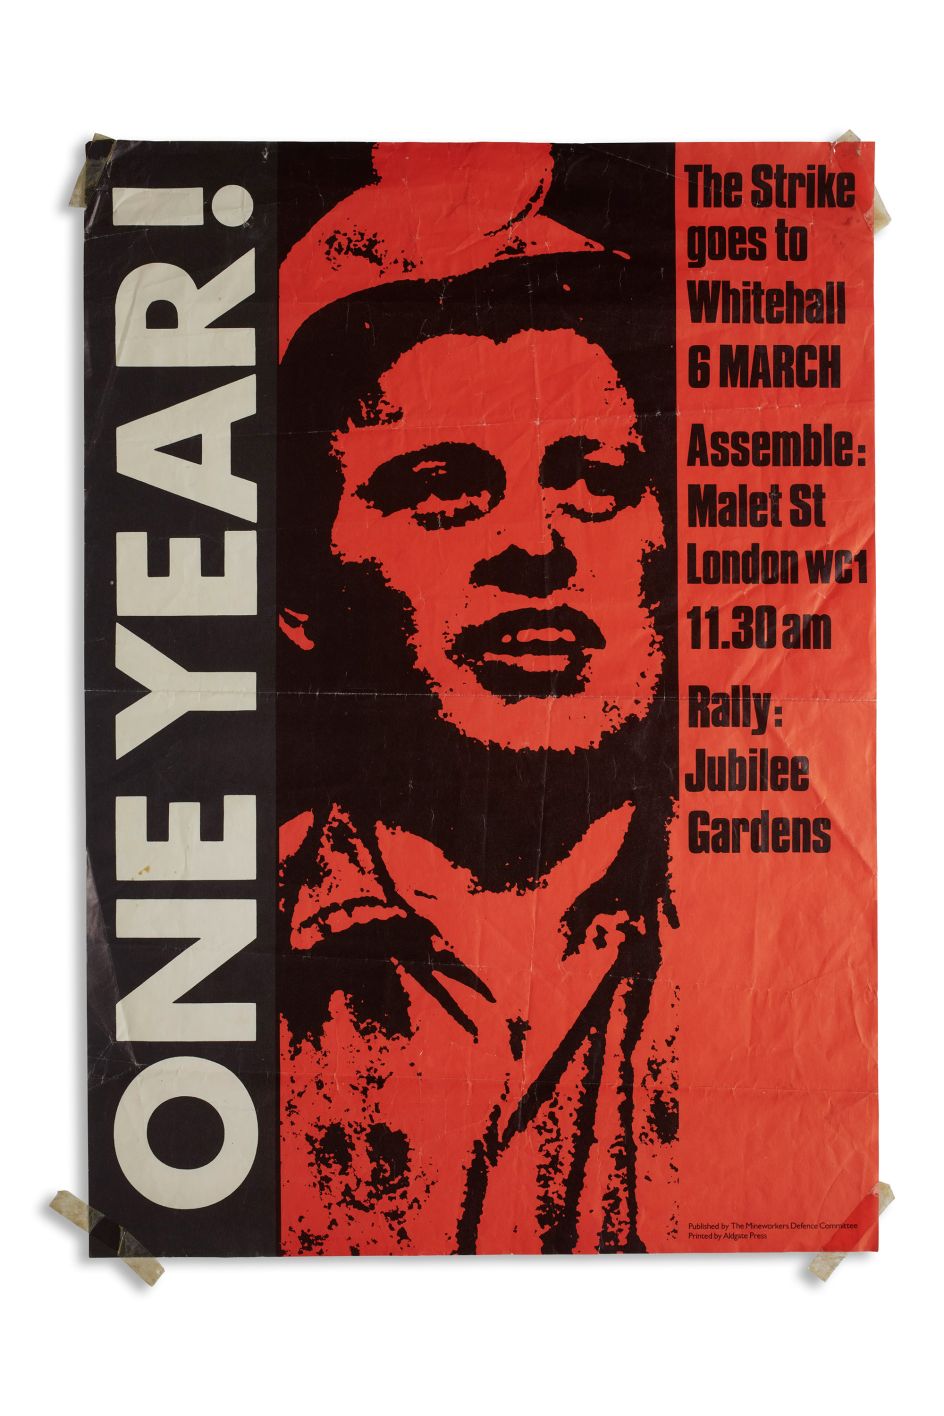 ONE YEAR! The Strike goes to Whitehall. Poster published by the Mineworkers Defence Committee. Printed by Aldgate Press